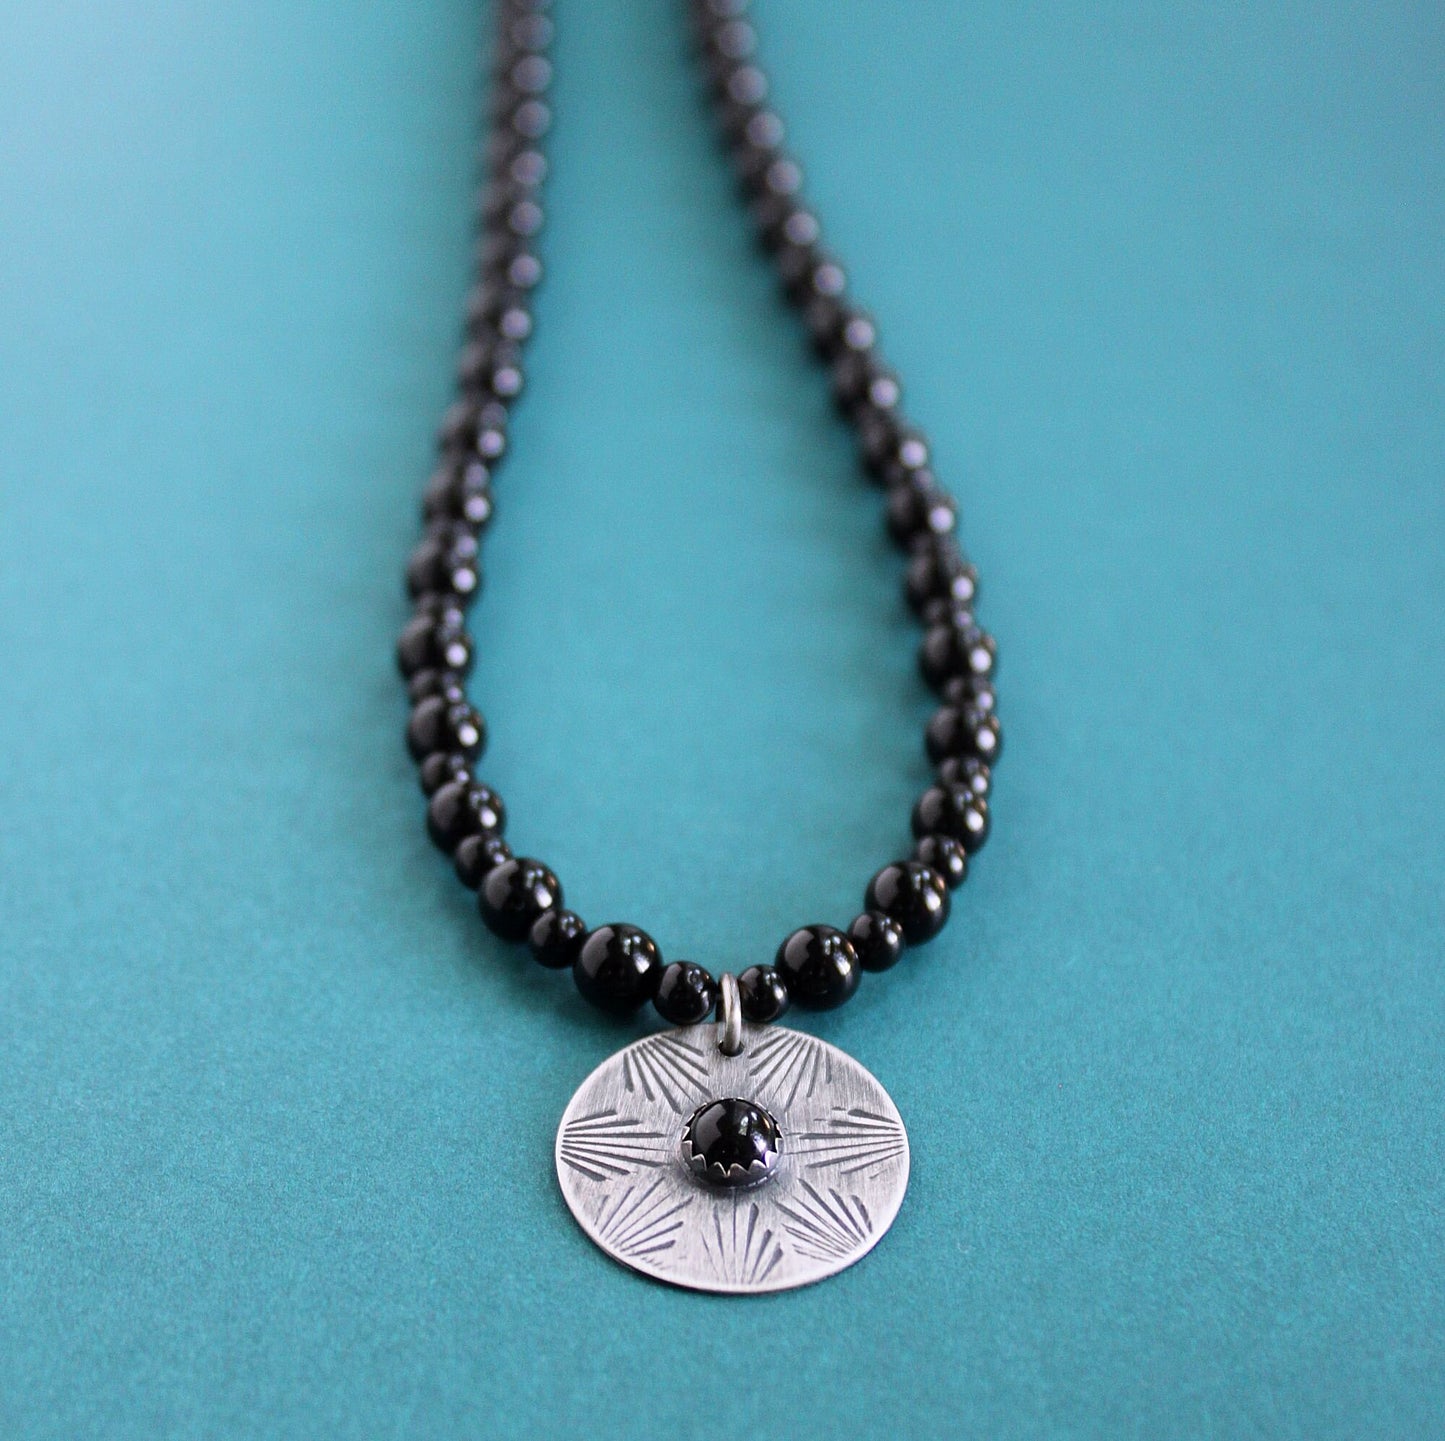 Onyx Stone Necklace, Silver Stamped Pendant